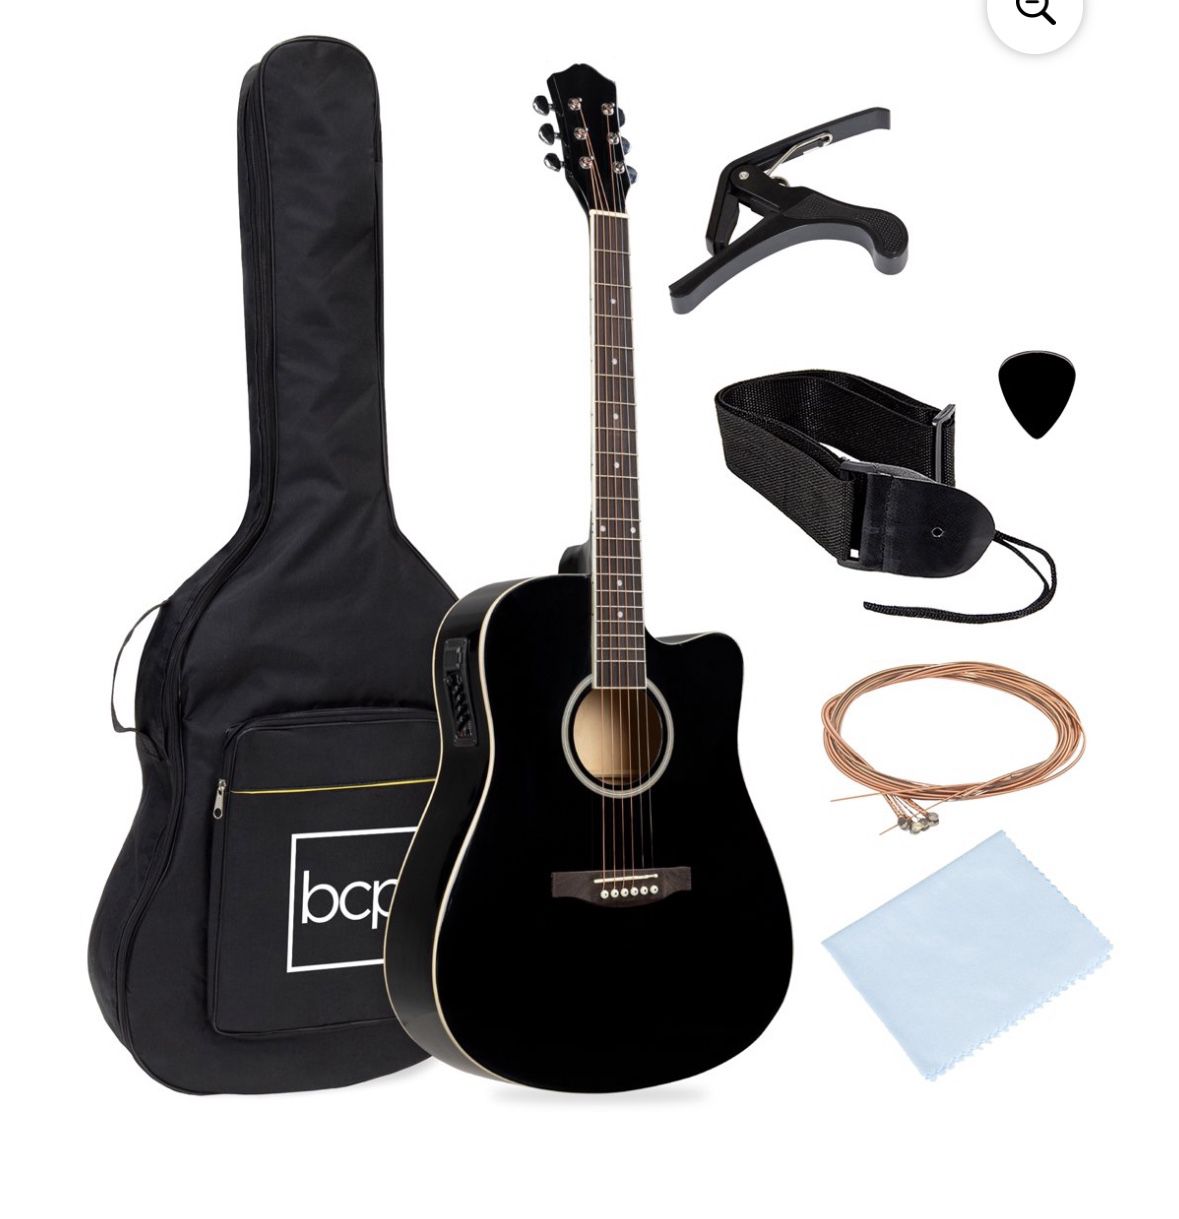 Best Choice Products Beginner Acoustic Electric Guitar Starter Set 41in w/ All Wood Cutaway Design, Case - Black